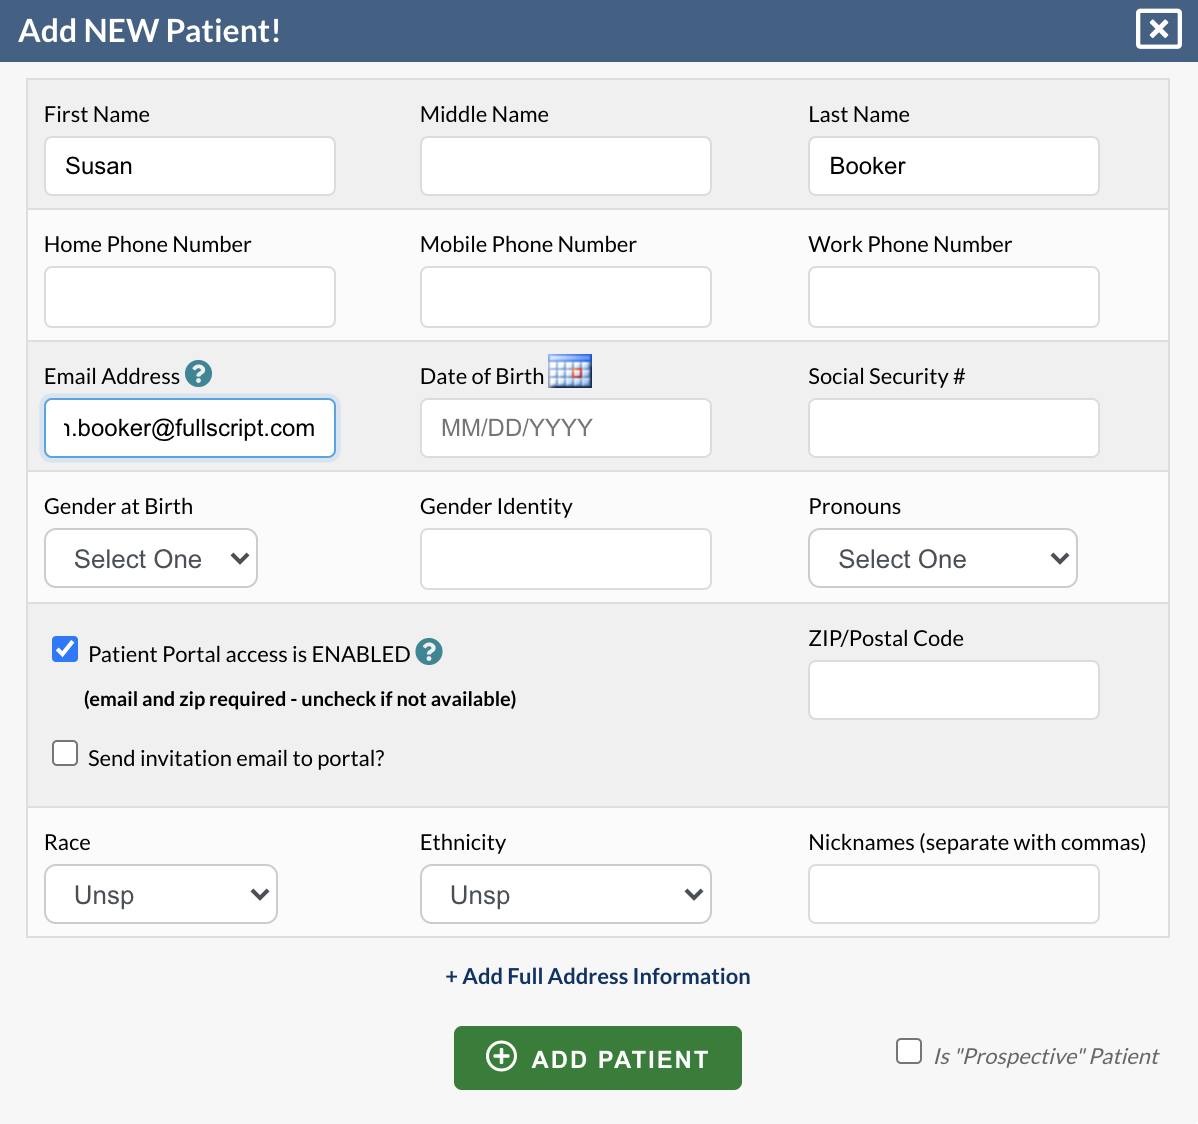 Fill in required fields then click add patient